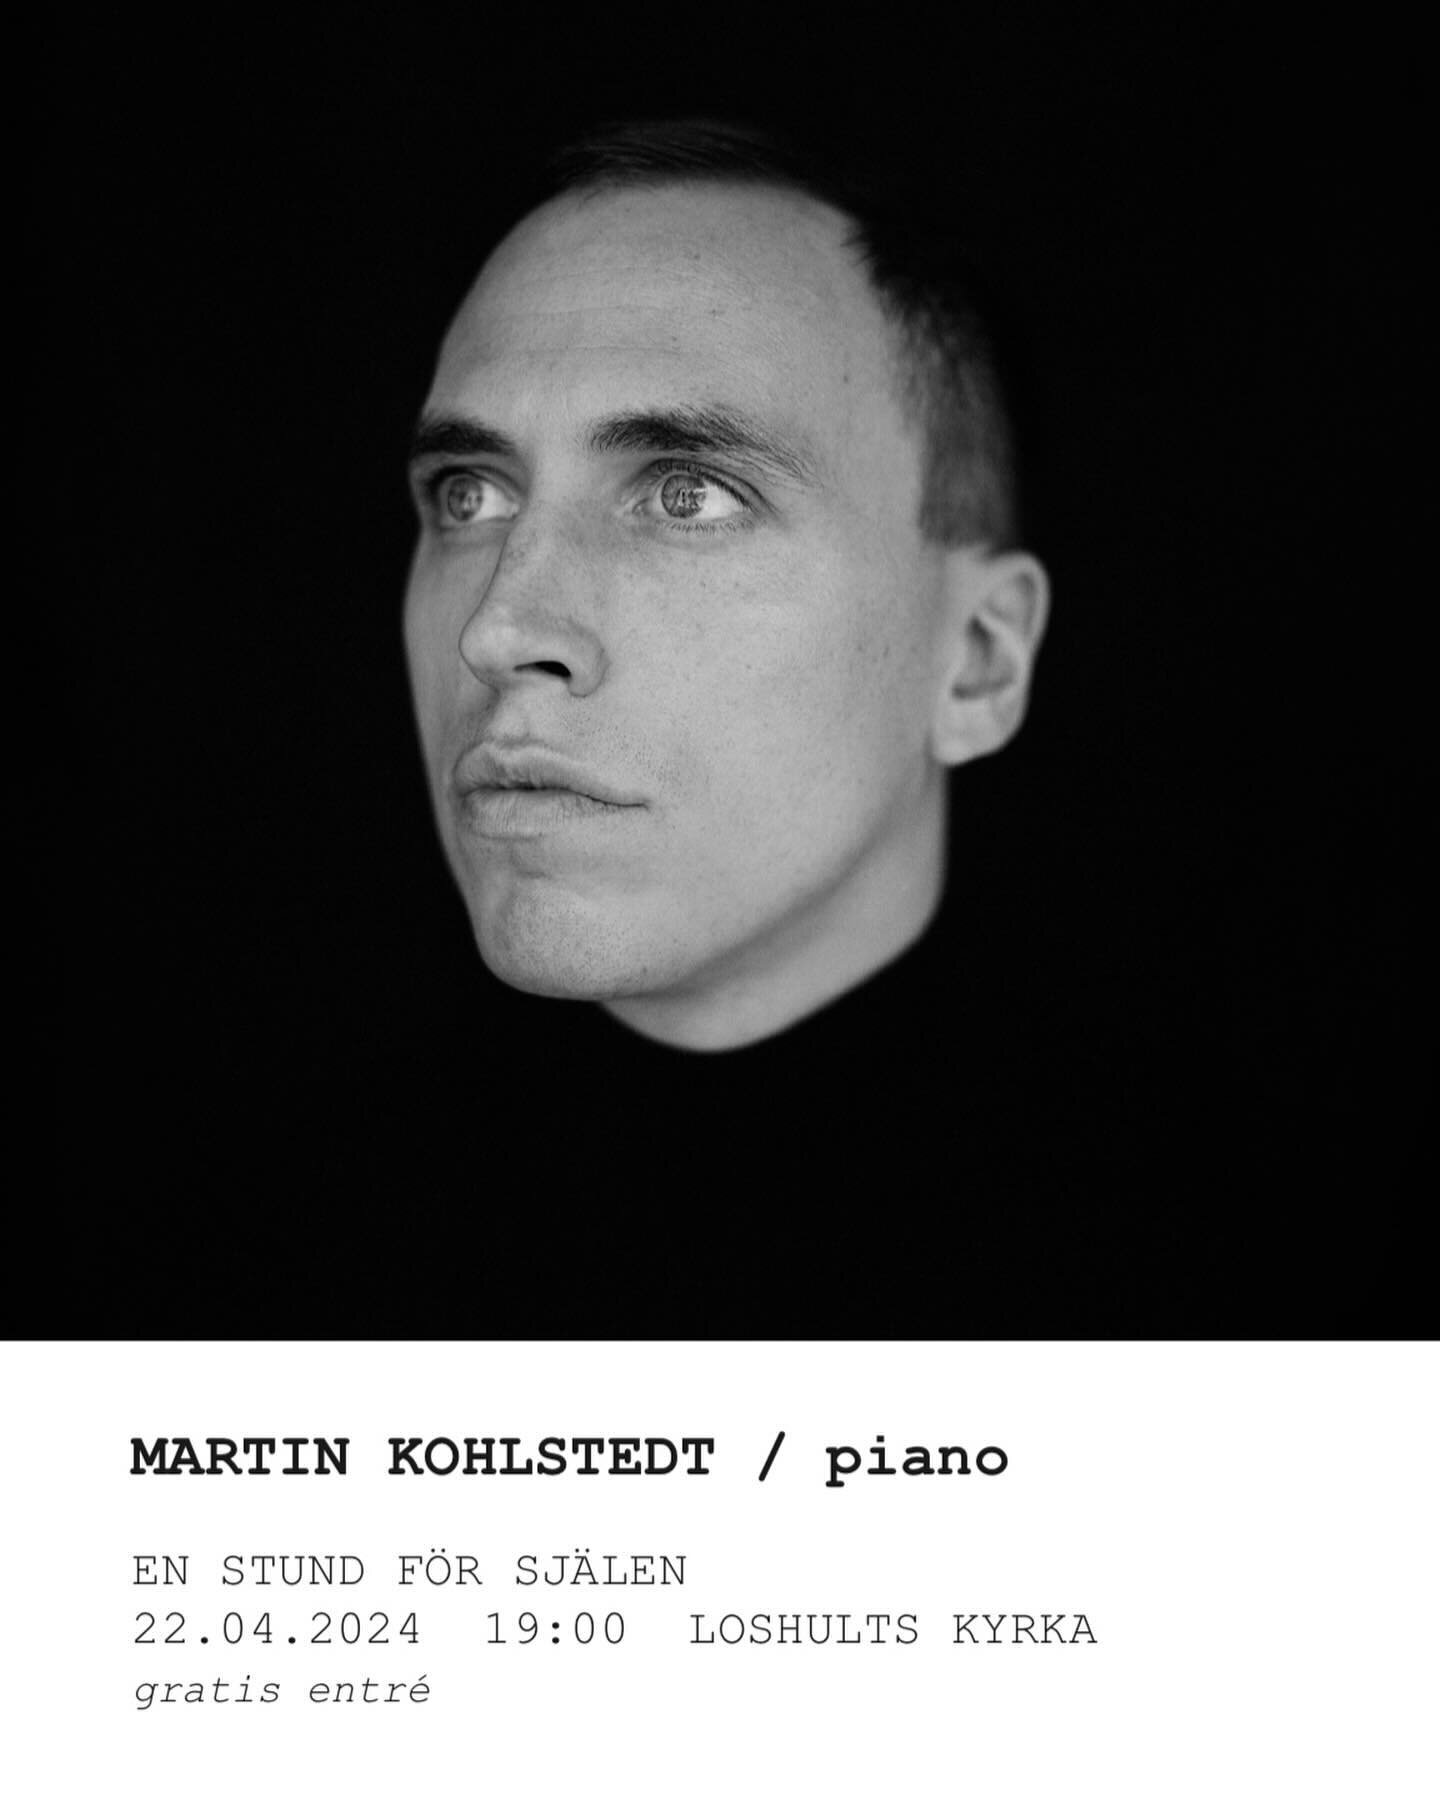 We love music and even more live music!
We want to invite you all to a beautiful concert&hellip;

Martin Kohlstedt will play for us in our Loshult Church. 

Join us for a wonderful piano concert.
Monday, 22.04.2024 19:00
&ldquo;En stund f&ouml;r sj&a